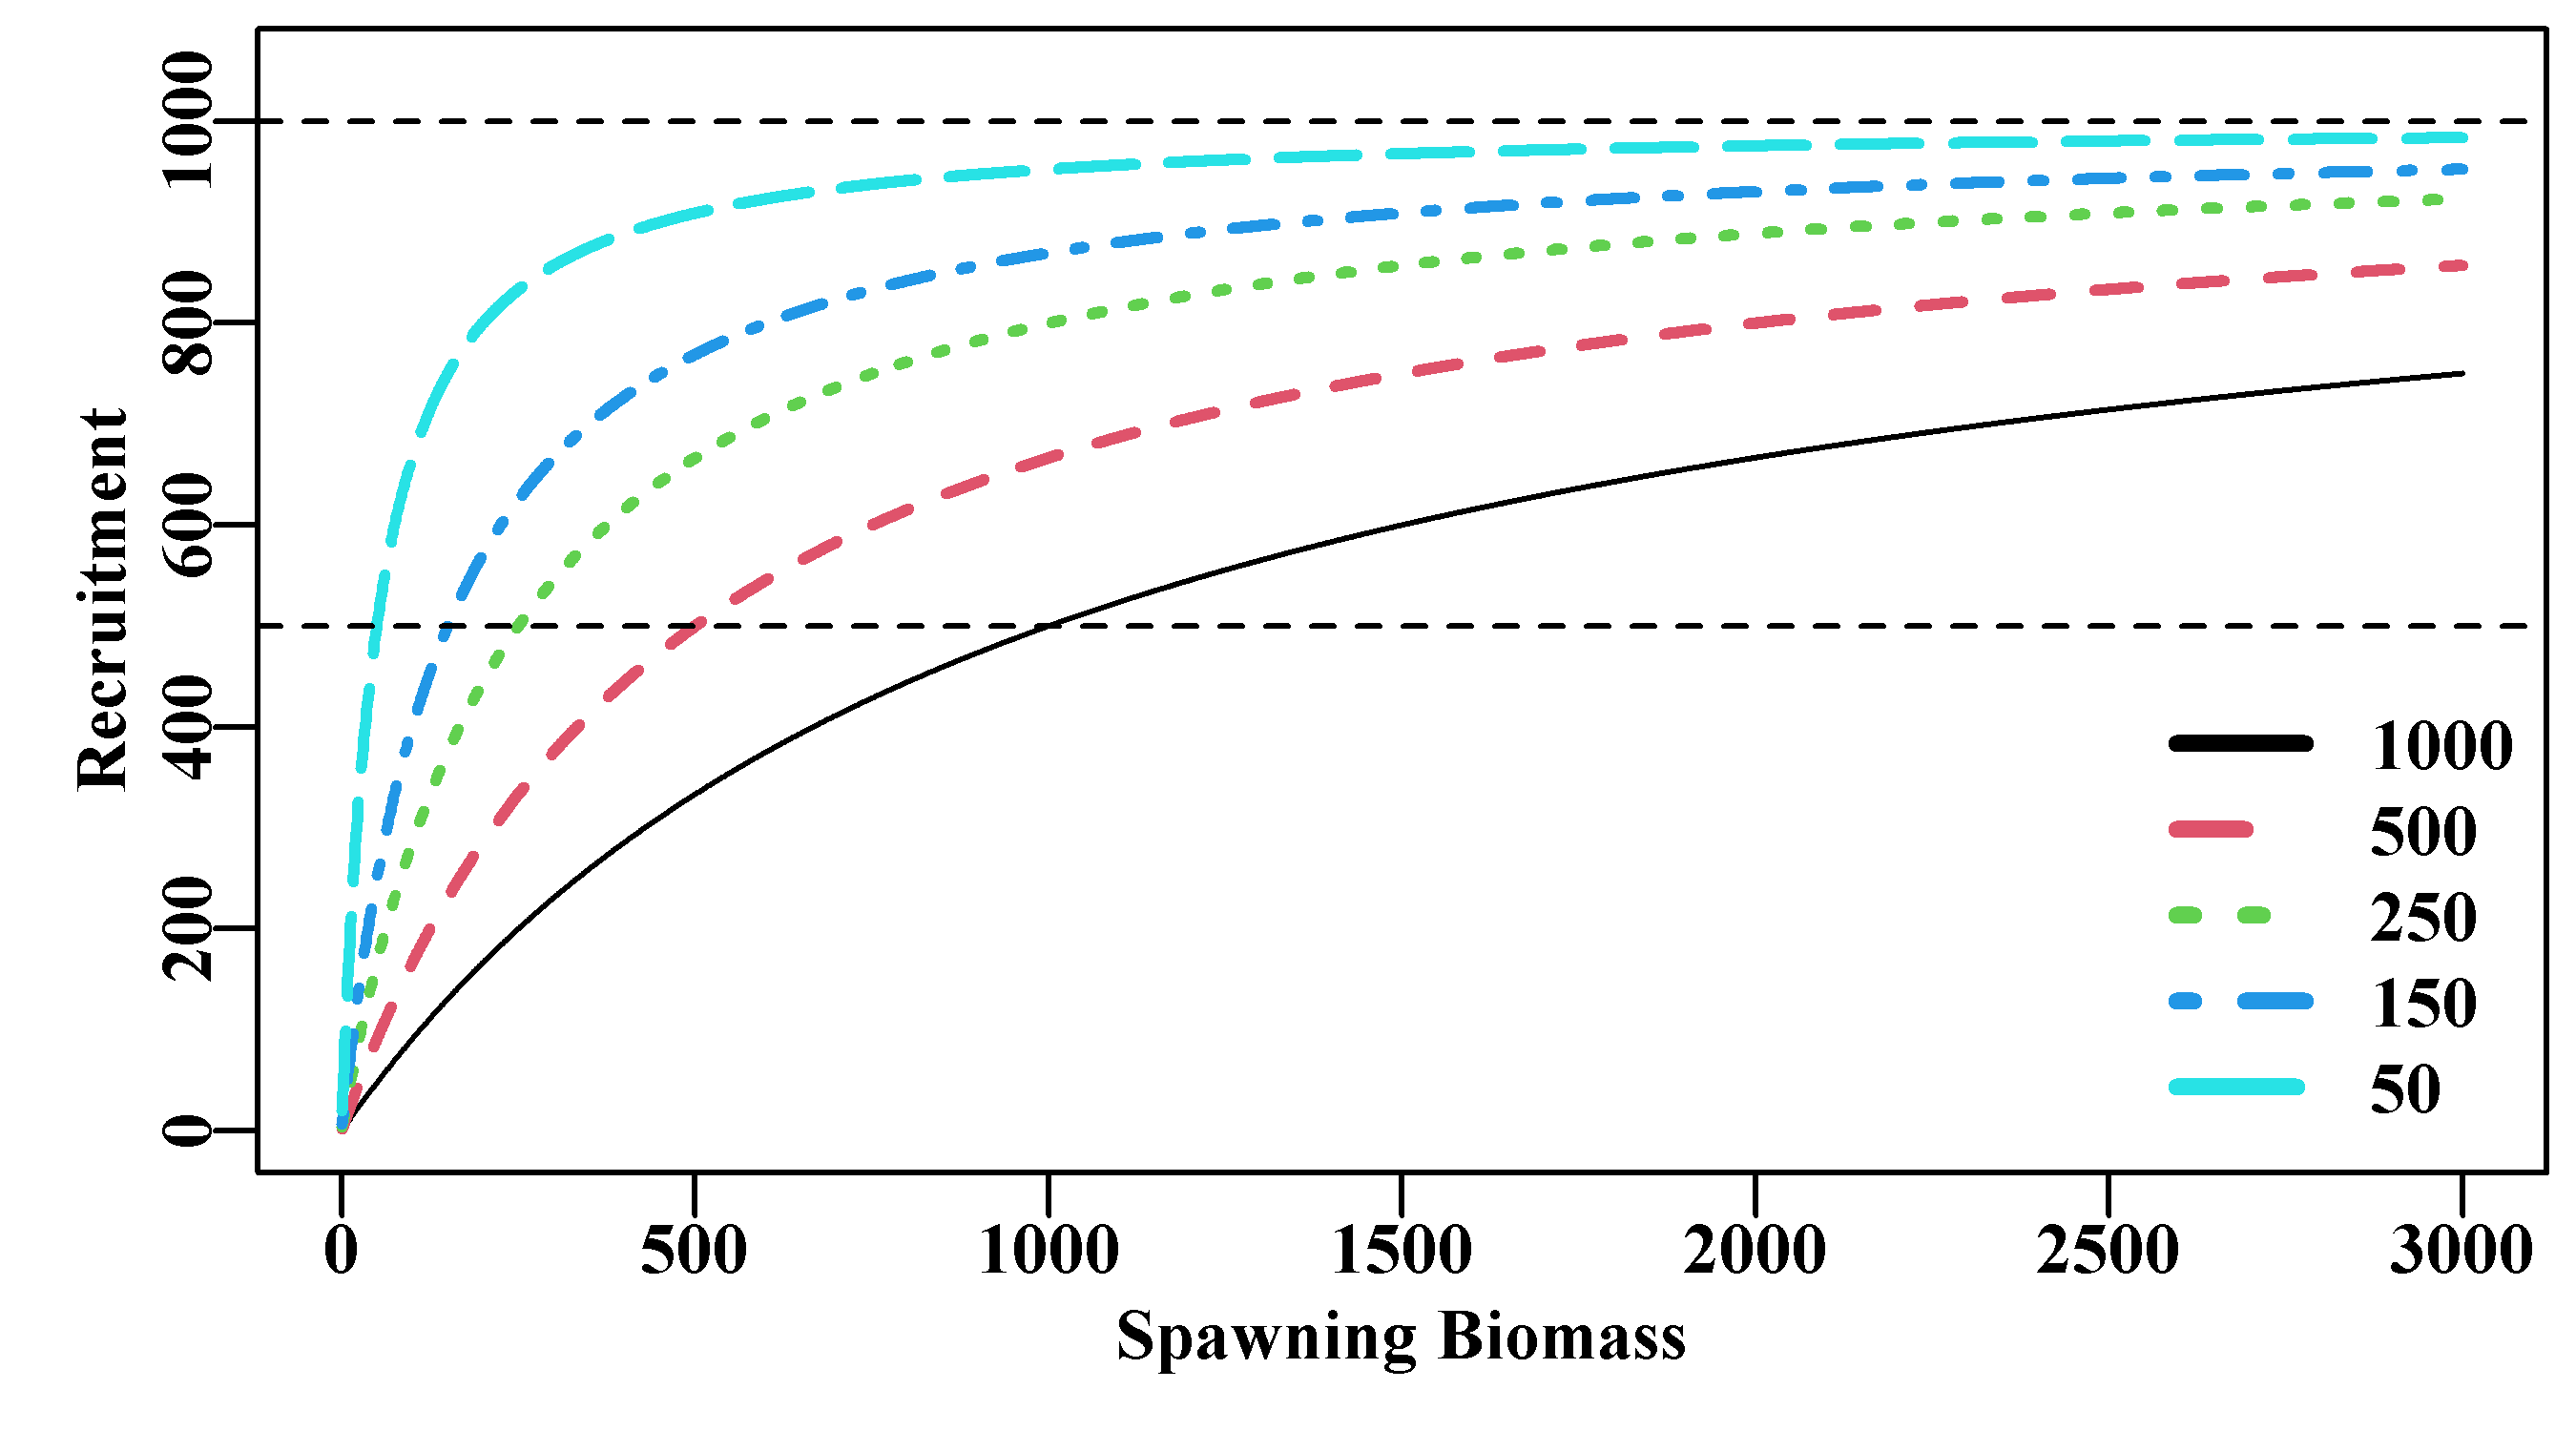 The Beverton-Holt stock recruitment curve with a constant a = 1000 and five decreasing b values leading to increasingly productive curves.